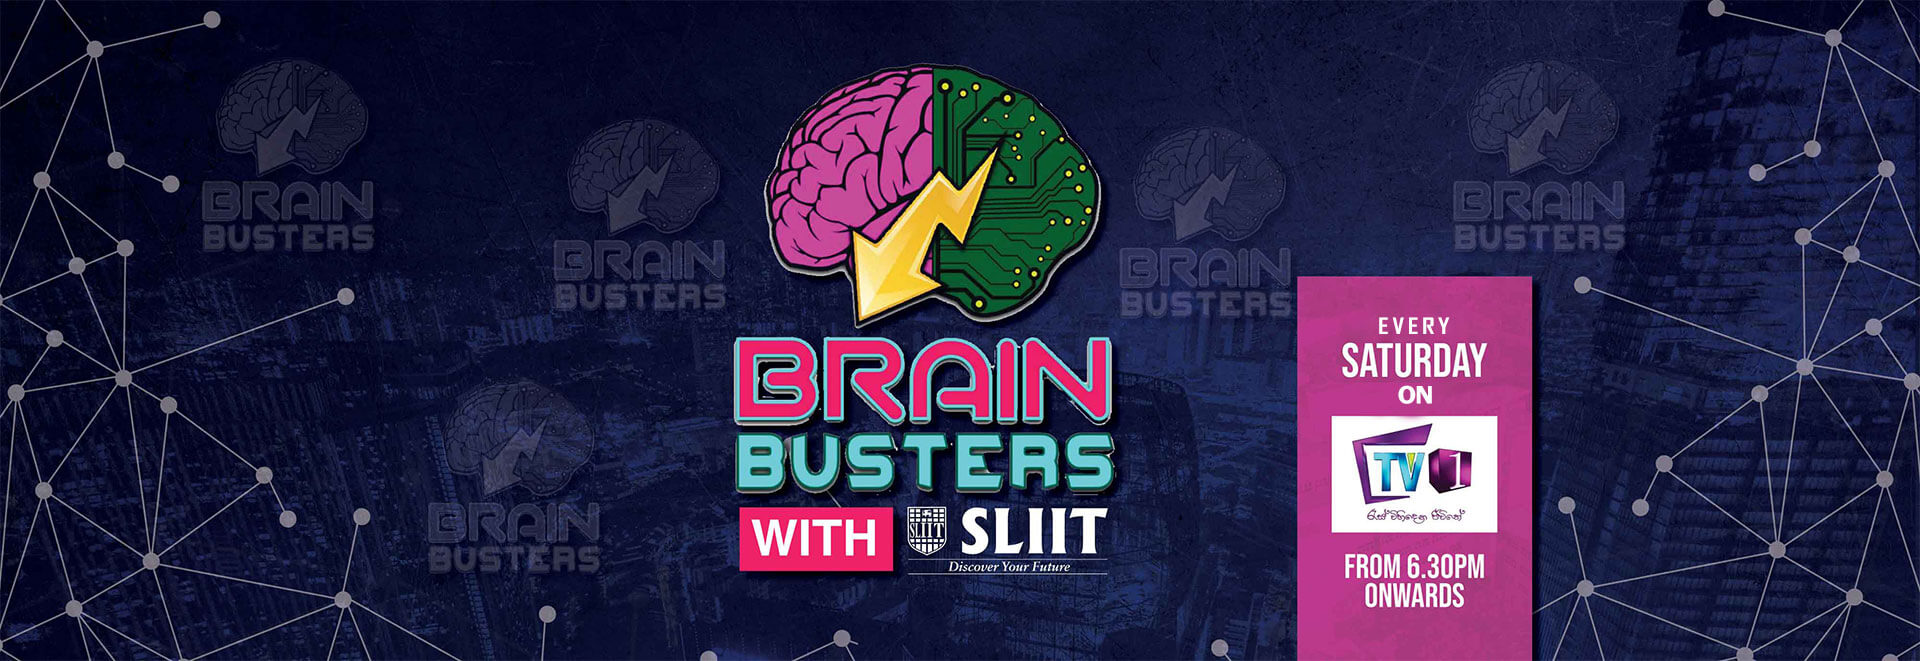 demolition vs brain busters 2 out of 3 falls